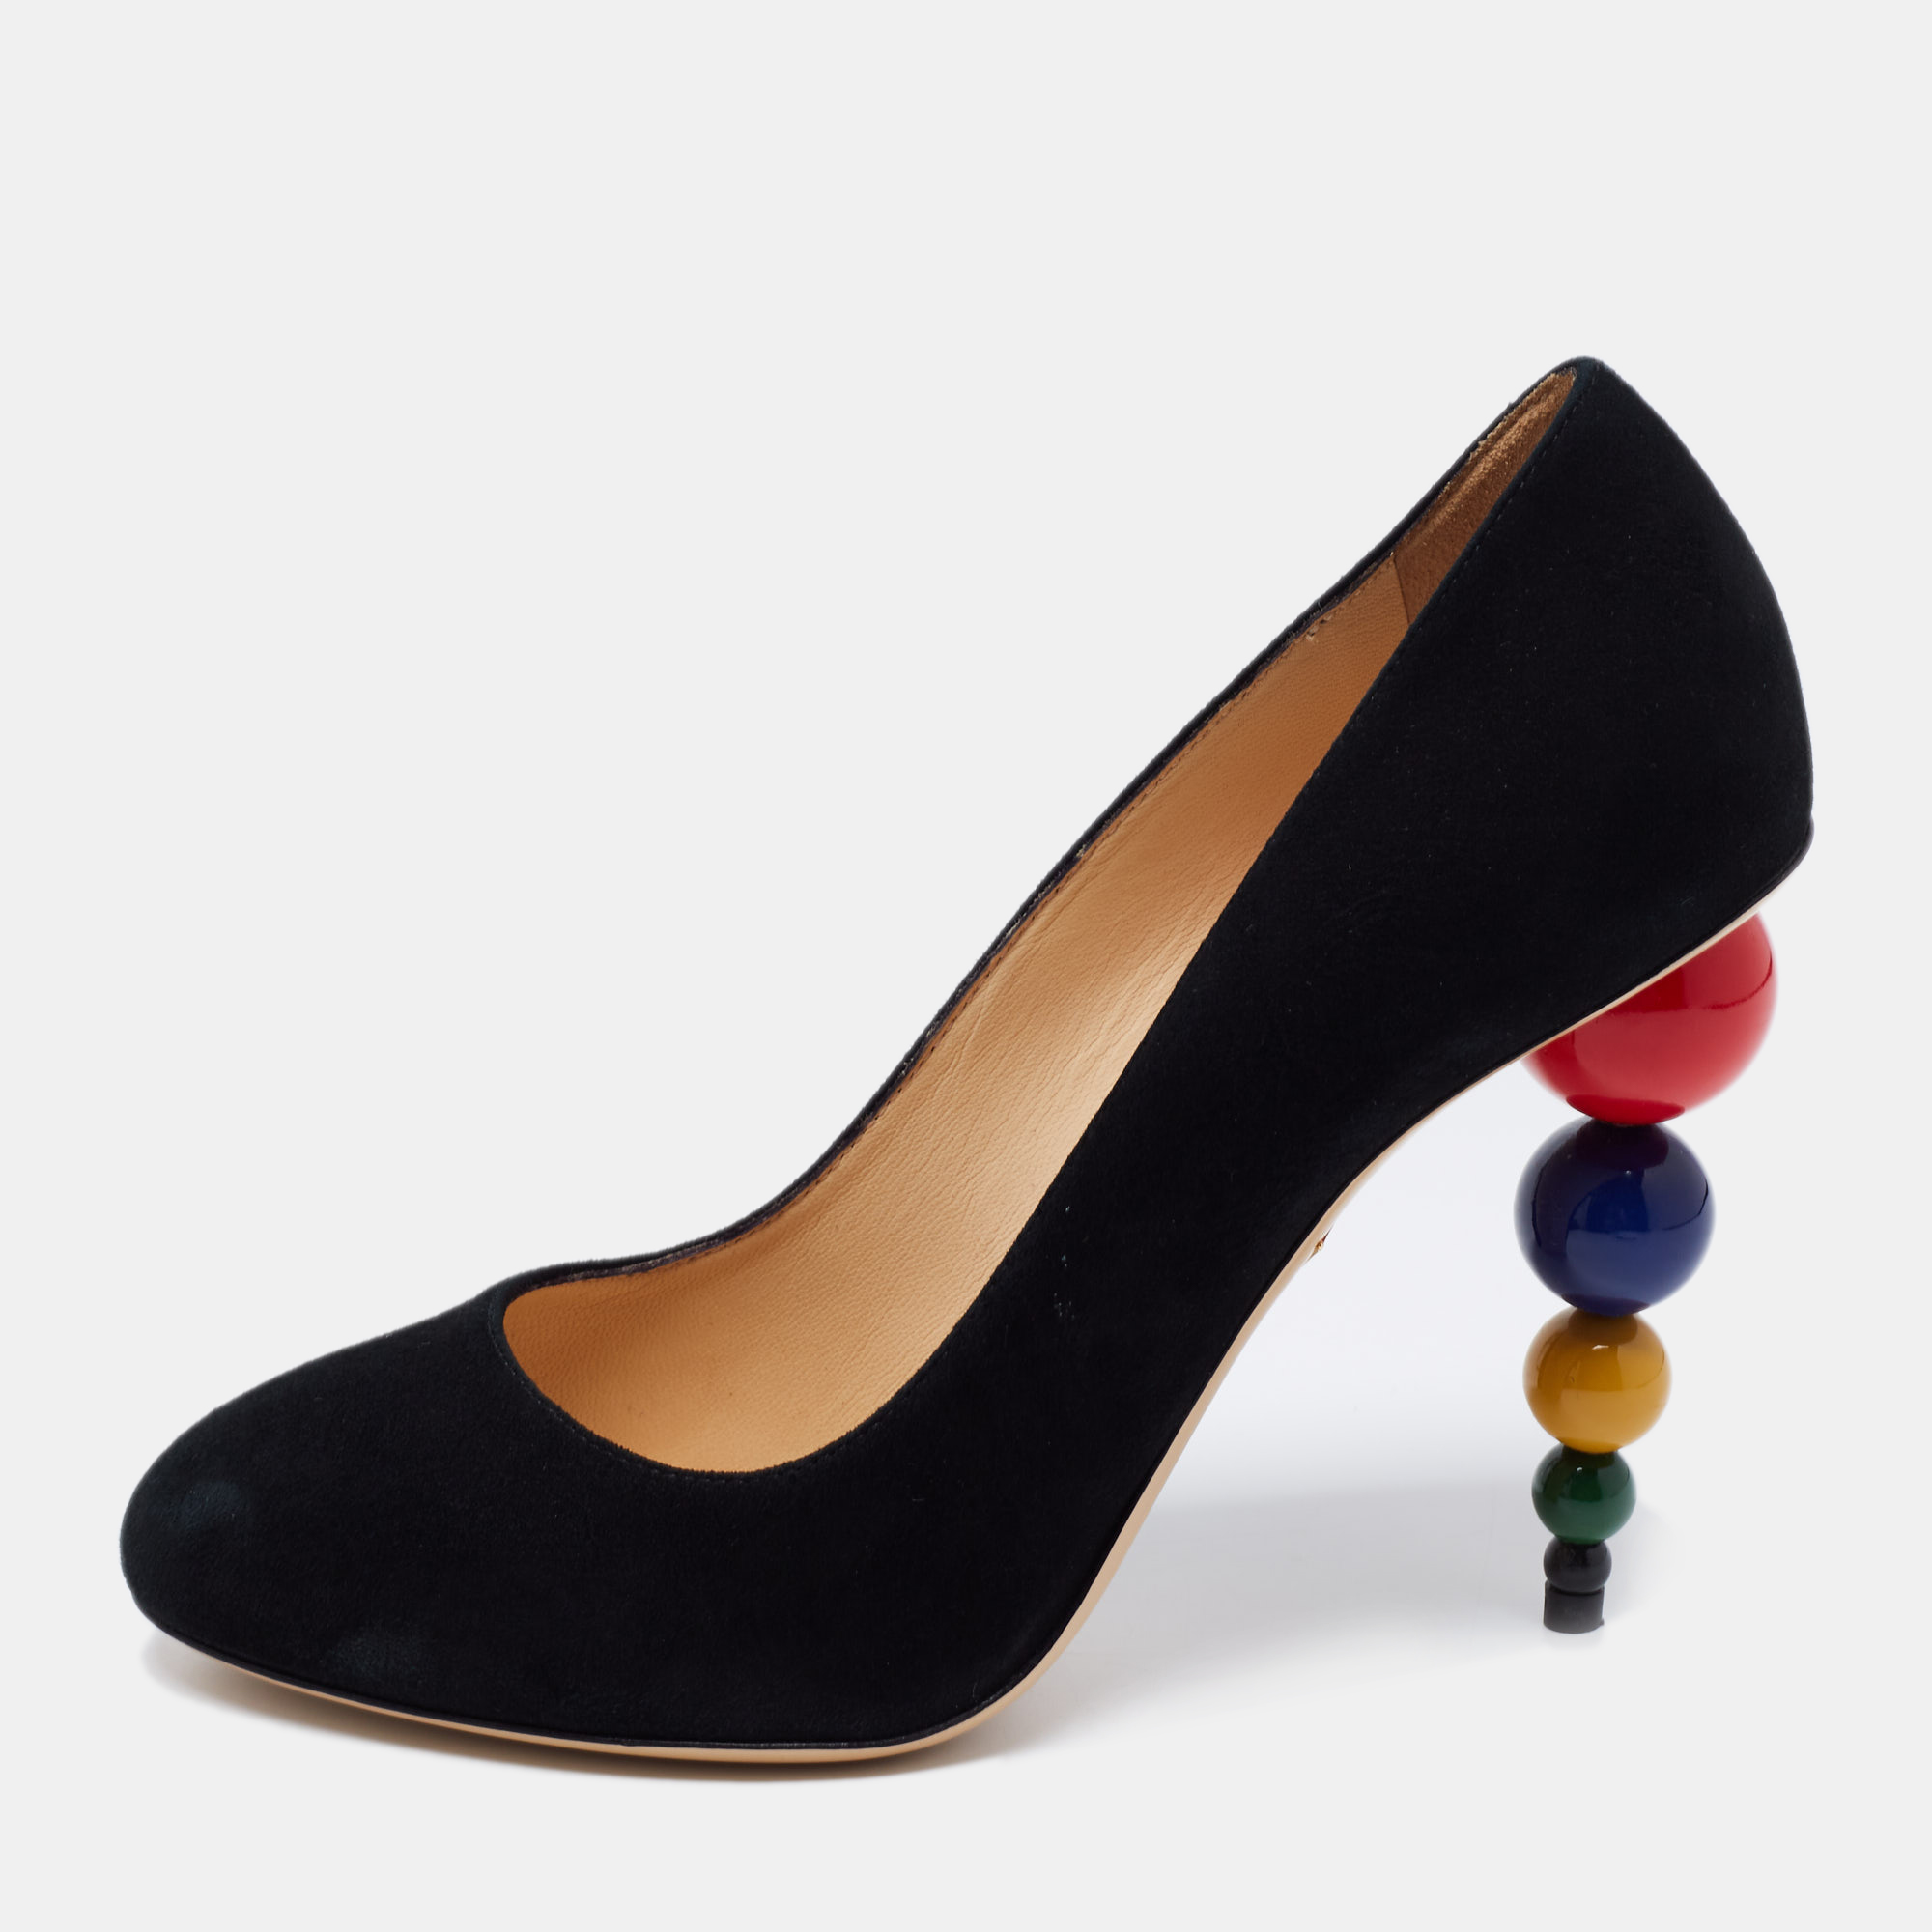 Charlotte olympia black suede mid century pumps size 37.5